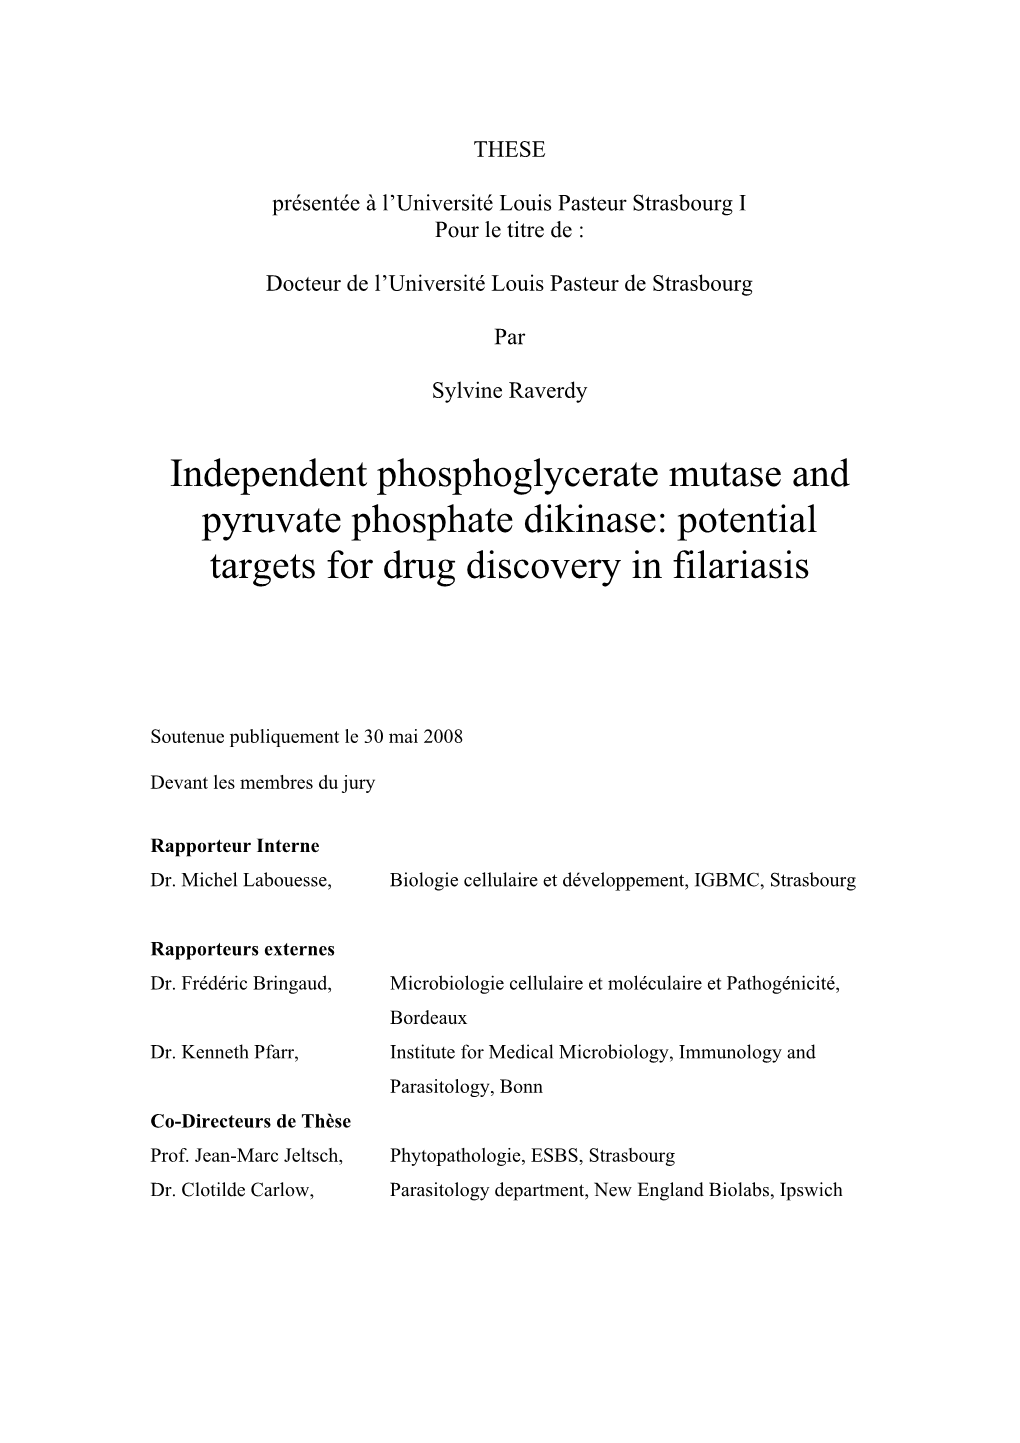 Independent Phosphoglycerate Mutase and Pyruvate Phosphate Dikinase: Potential Targets for Drug Discovery in Filariasis